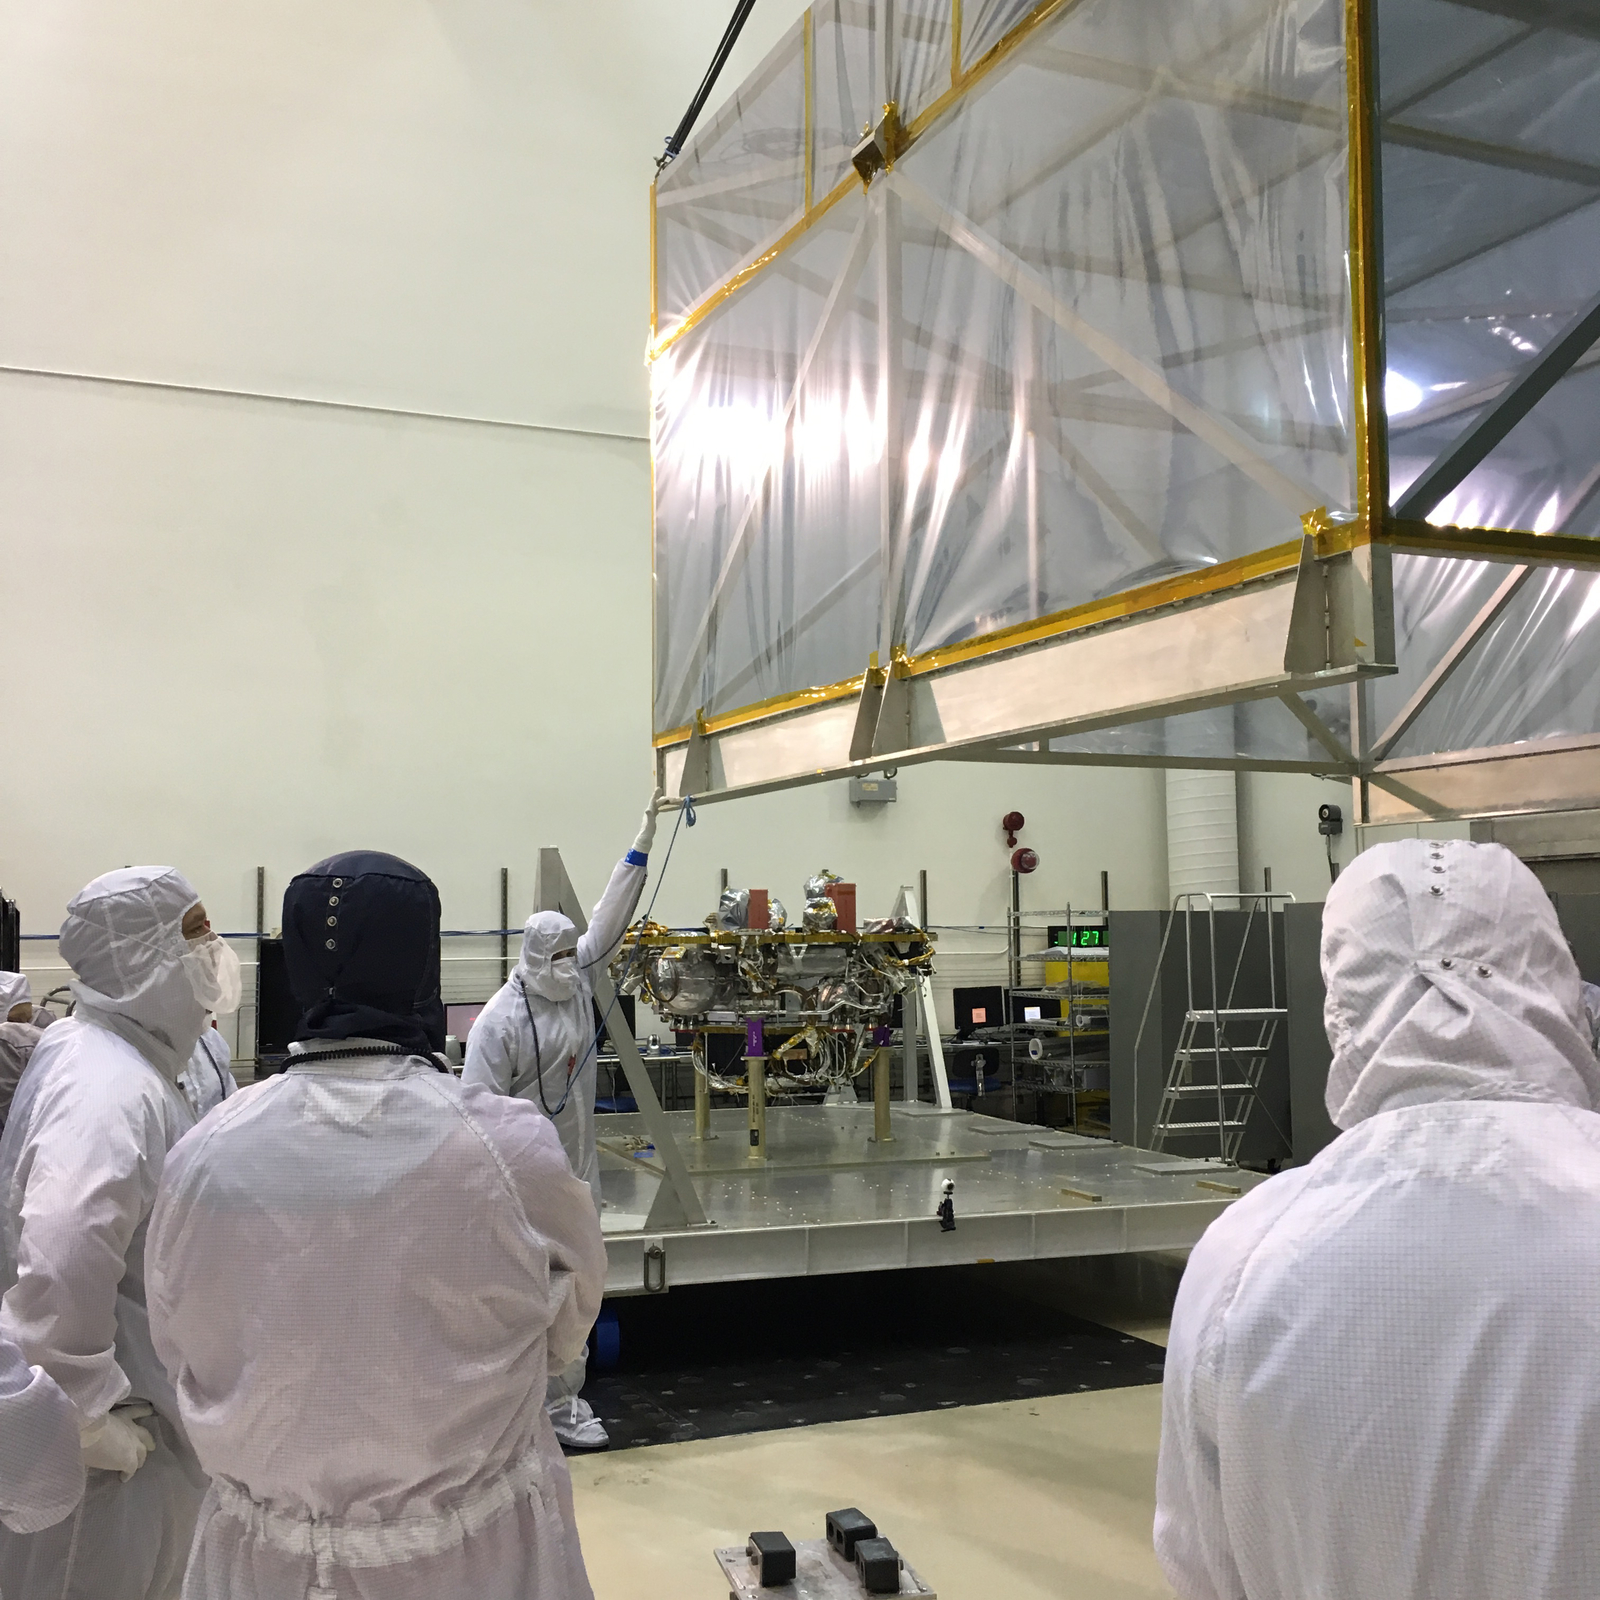 Spacecraft Coming out of Protective Storage